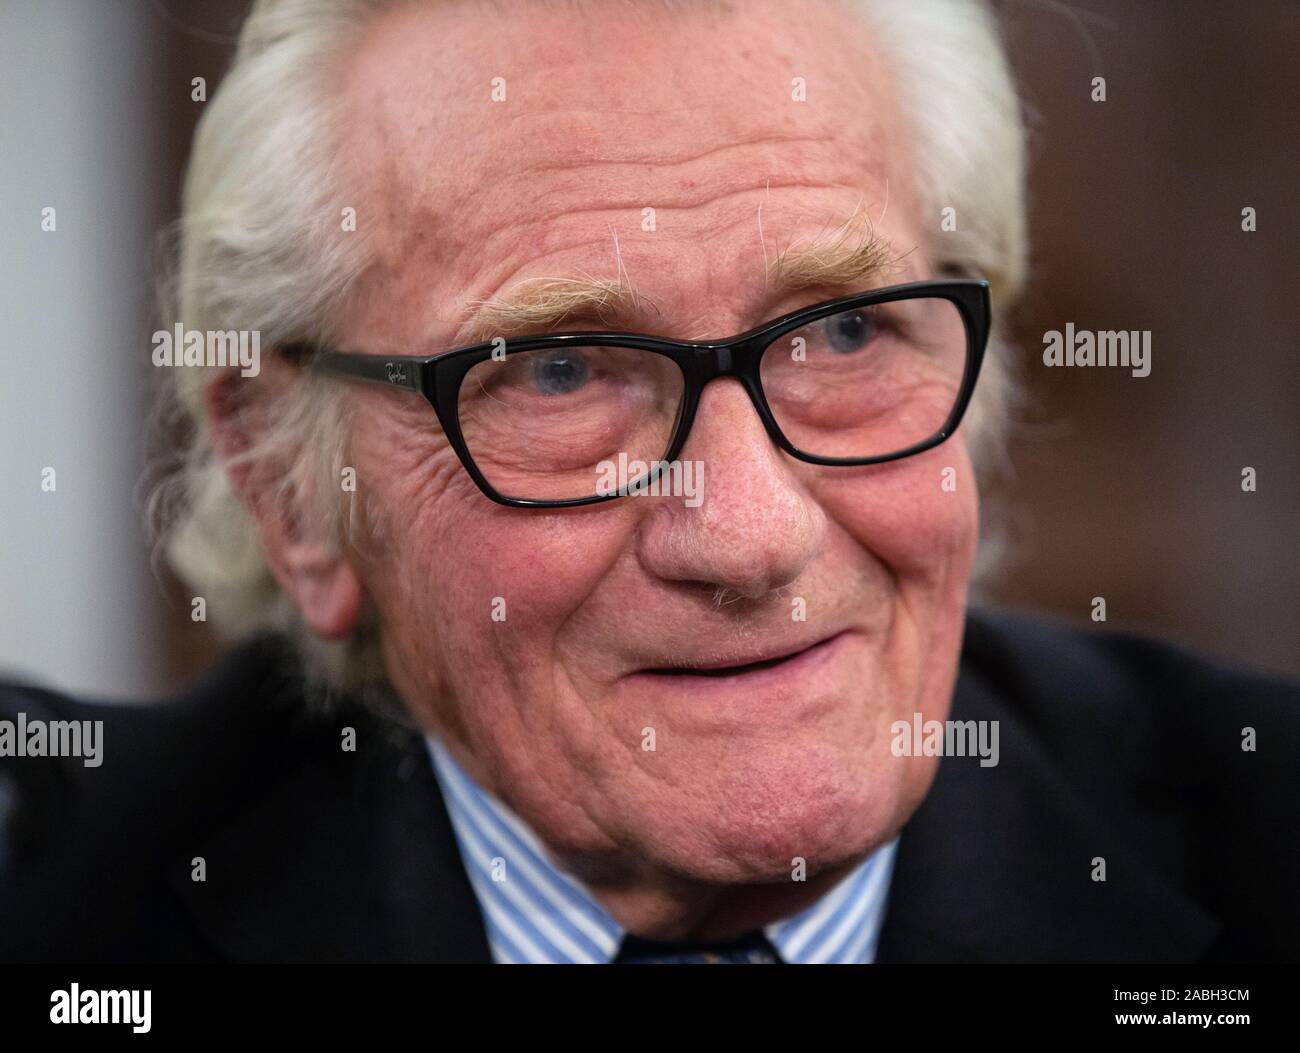 Baron Heseltine addresses group of Liberal Democrat supporters. He is a pro European and Conservative party member. Stock Photo